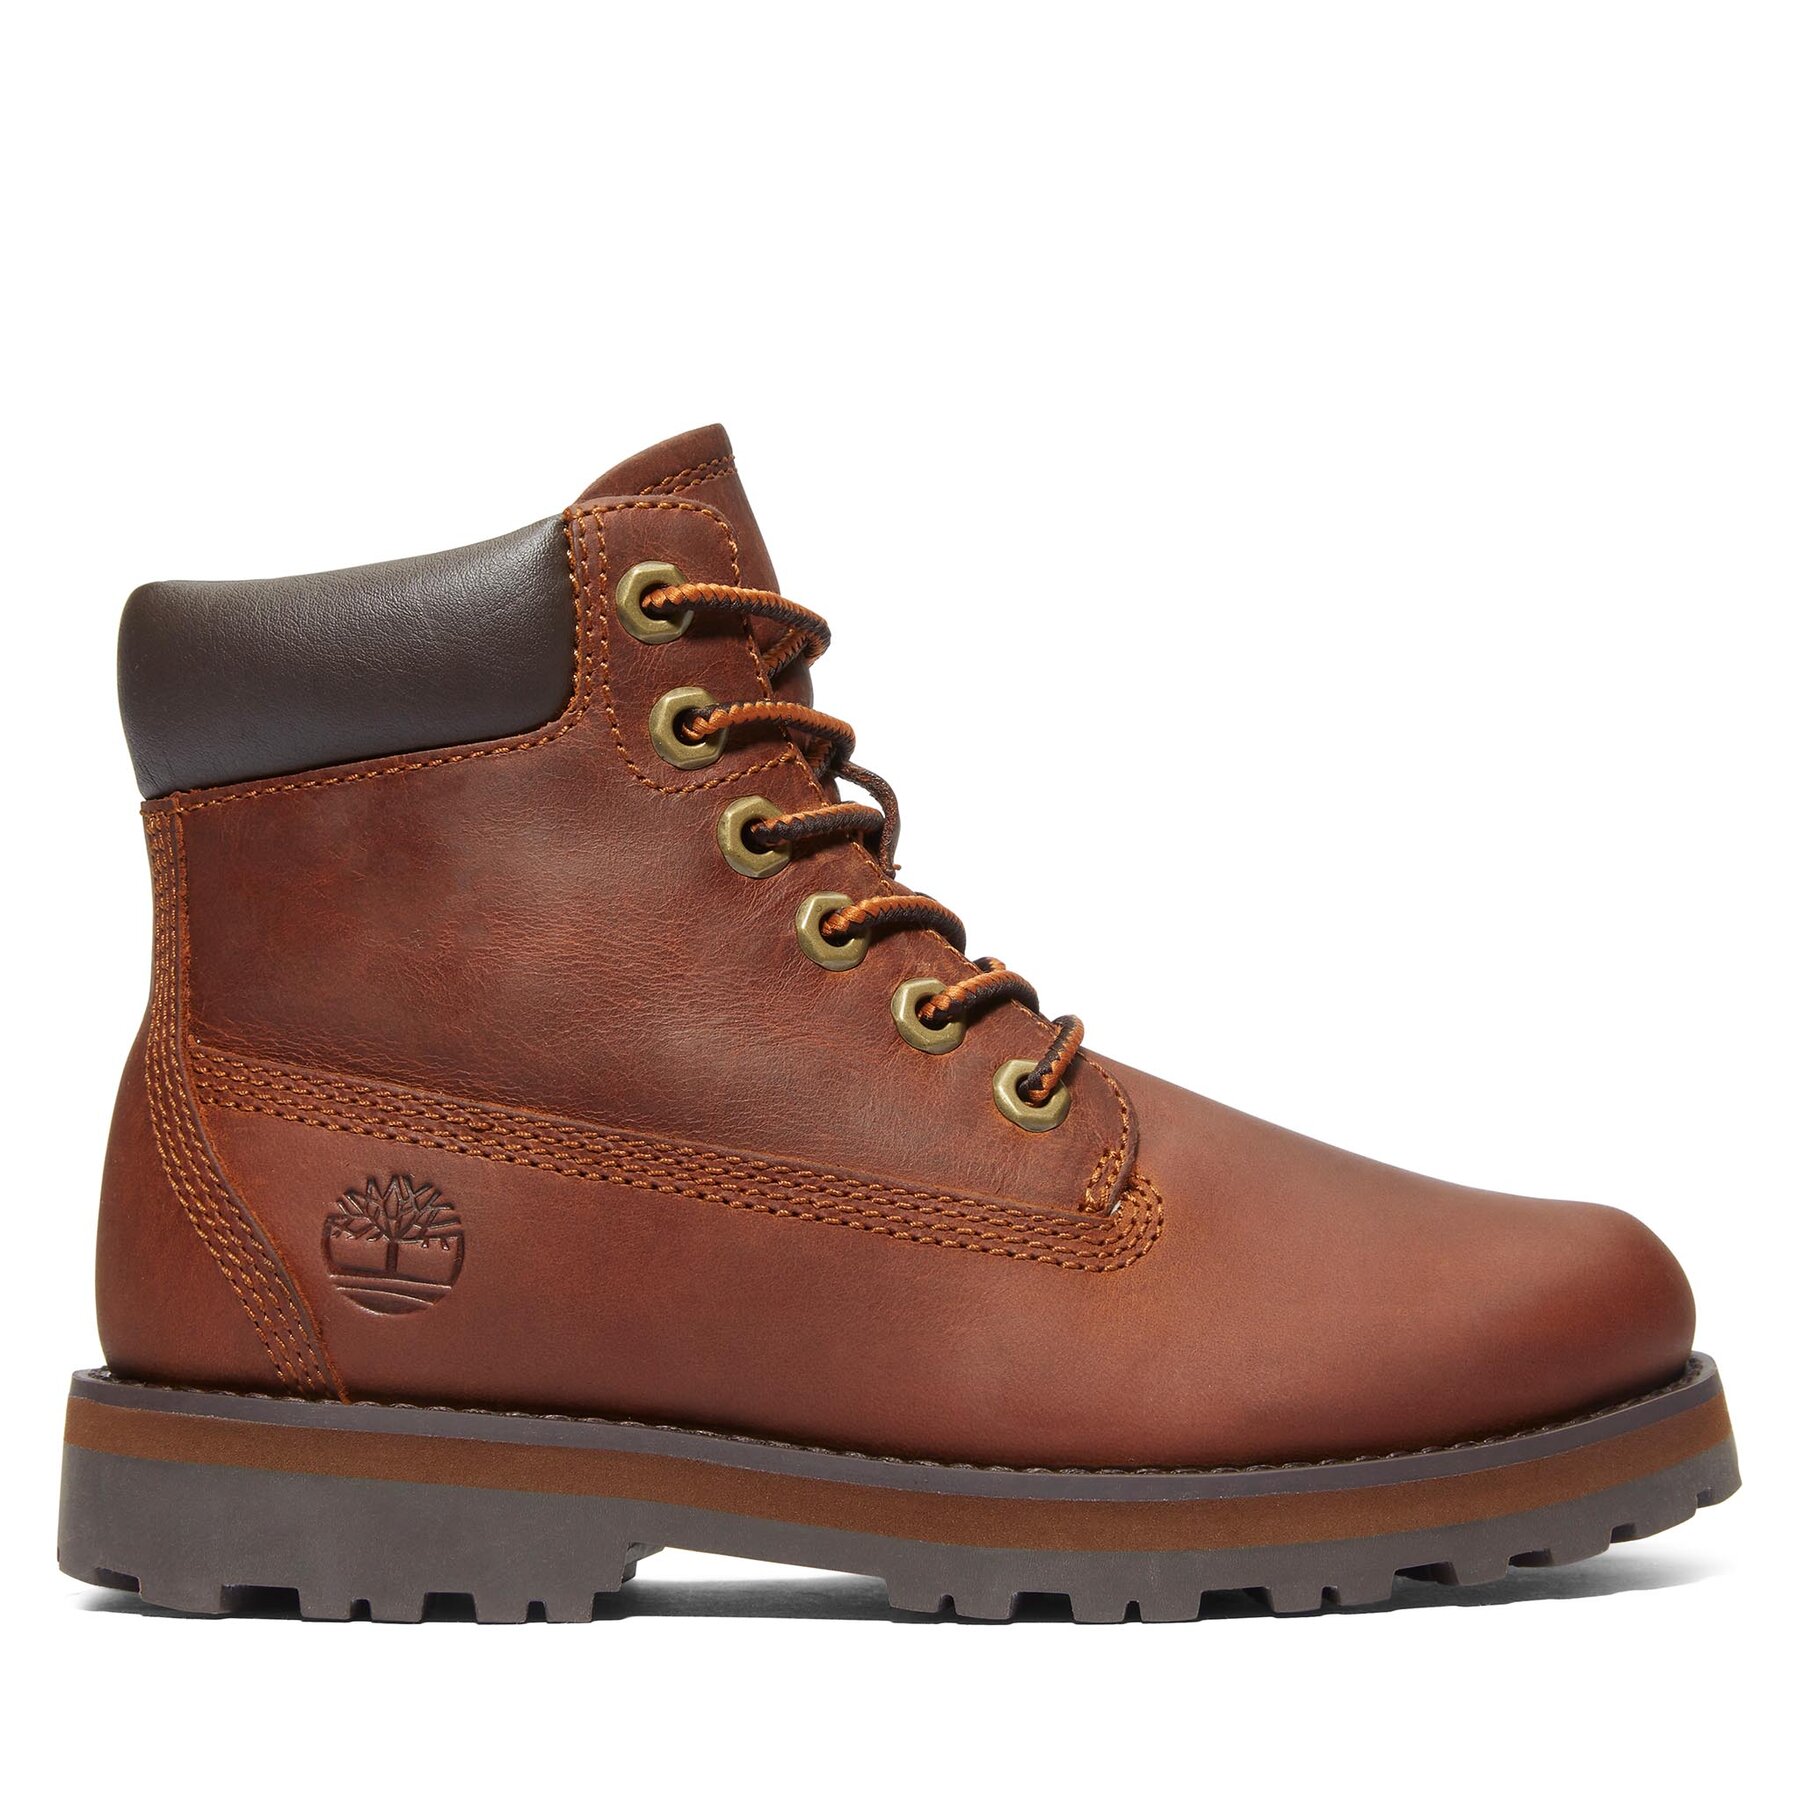 Timberland Courma Kid Traditional6In TB0A279Q3581 Brown - Calzado infantil